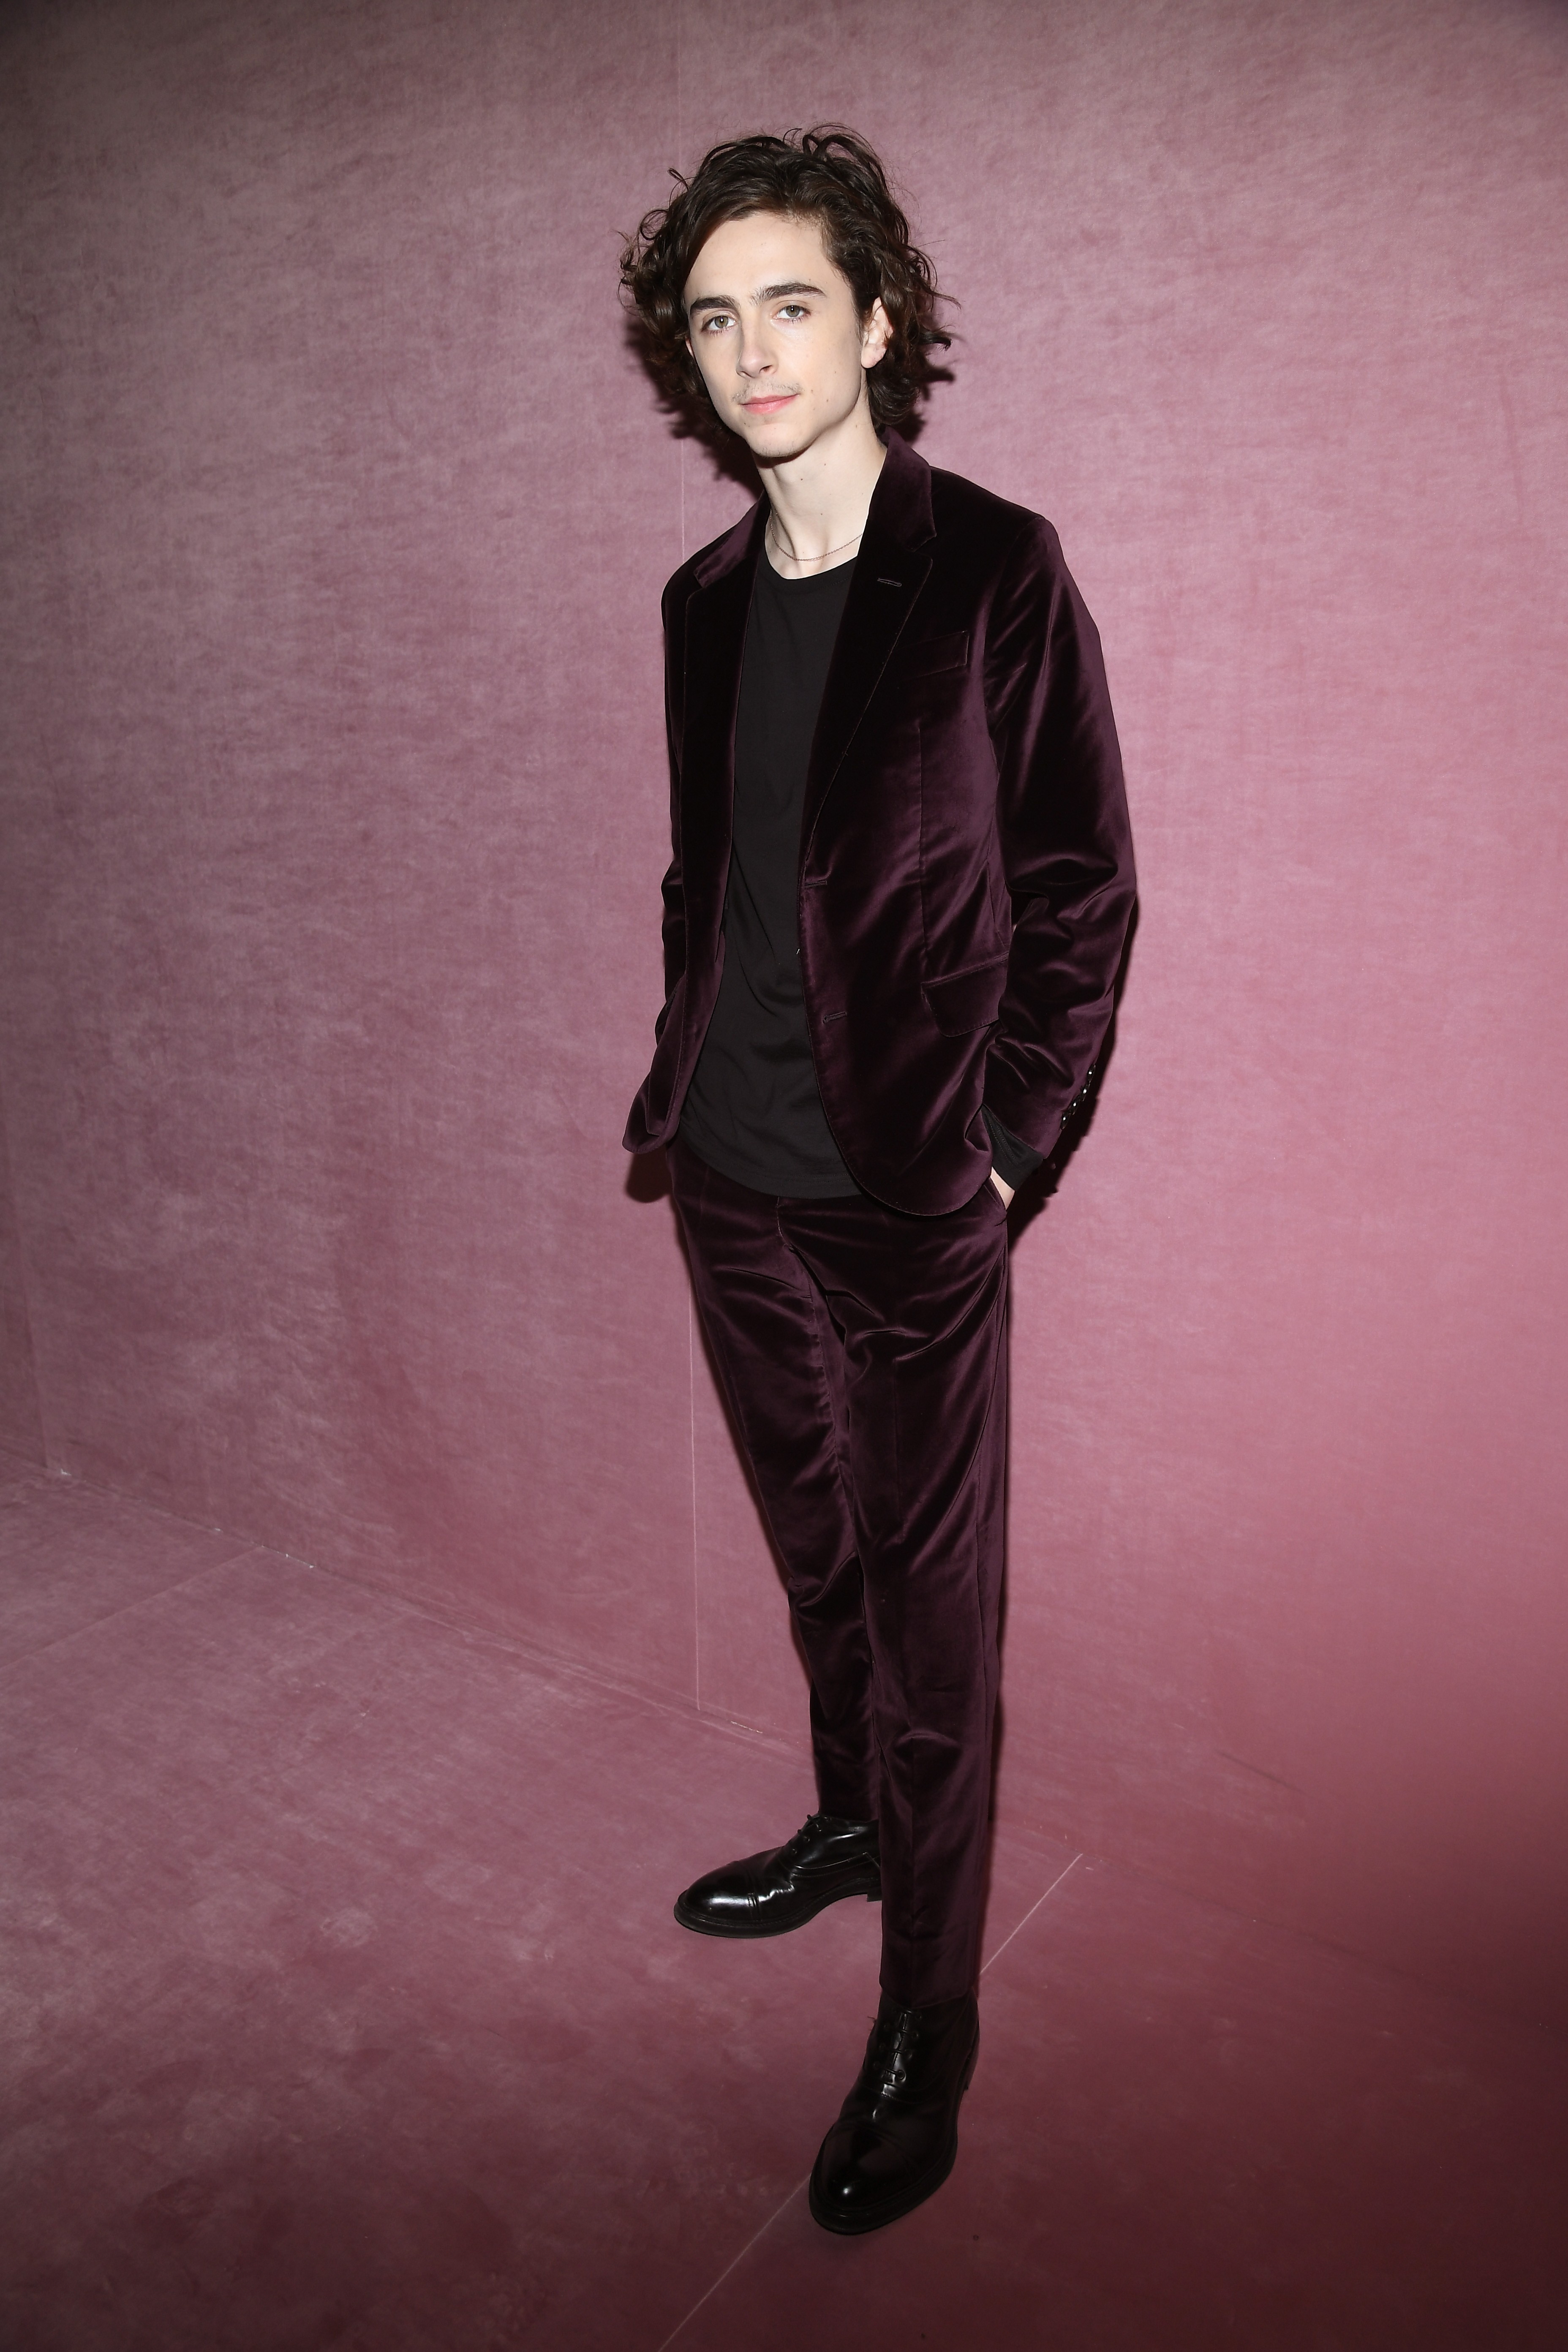 PARIS, FRANCE - JANUARY 19:  Timothee Chalamet attends the Berluti Menswear Fall/Winter 2018-2019 show as part of Paris Fashion Week on January 19, 2018 in Paris, France.  (Photo by Pascal Le Segretain/Getty Images) (Foto: Getty Images)